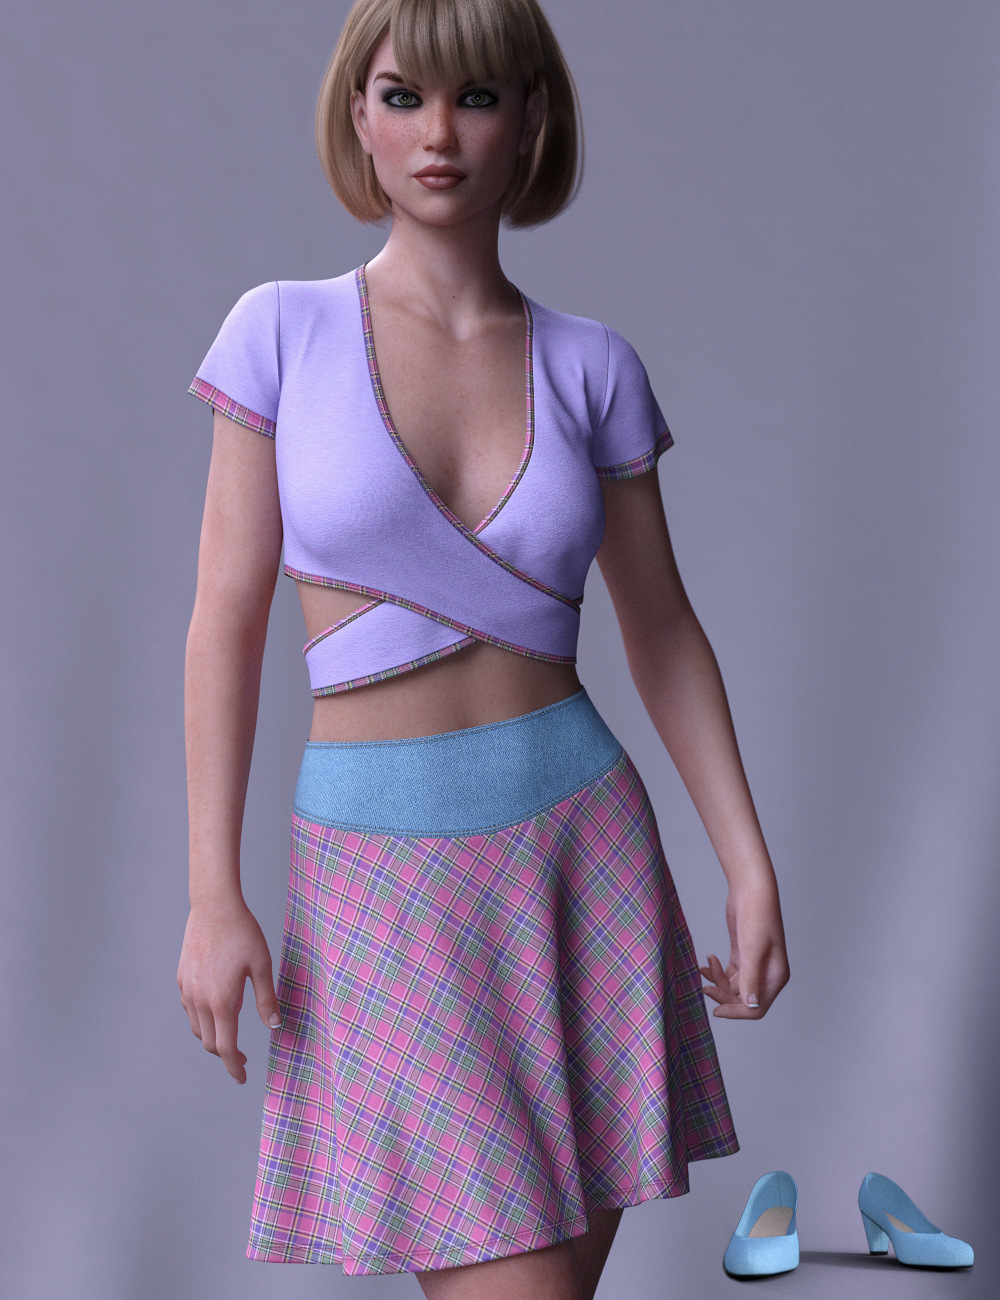 dForce Brazen Charm Outfit for Genesis 8 Female(s) by: Leviathan, 3D Models by Daz 3D